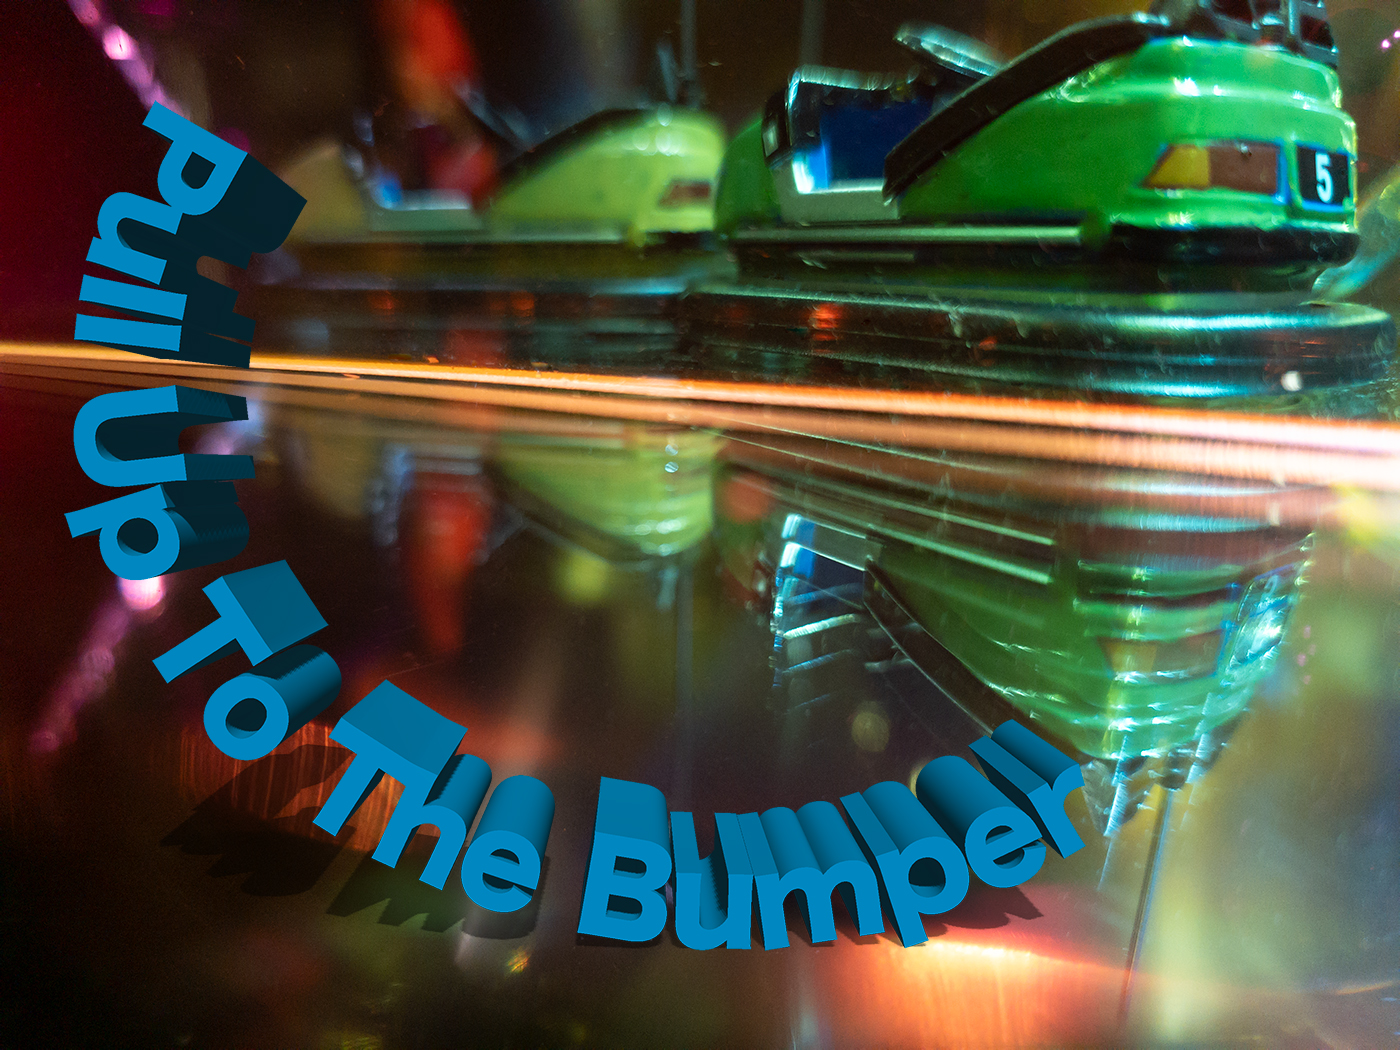 a colourful image of the back of a green dodgem car on a reflective floor, in the top right of the frame,  the words in blue text 'Pull Up To The Bumper' curving from left to lower centre right 